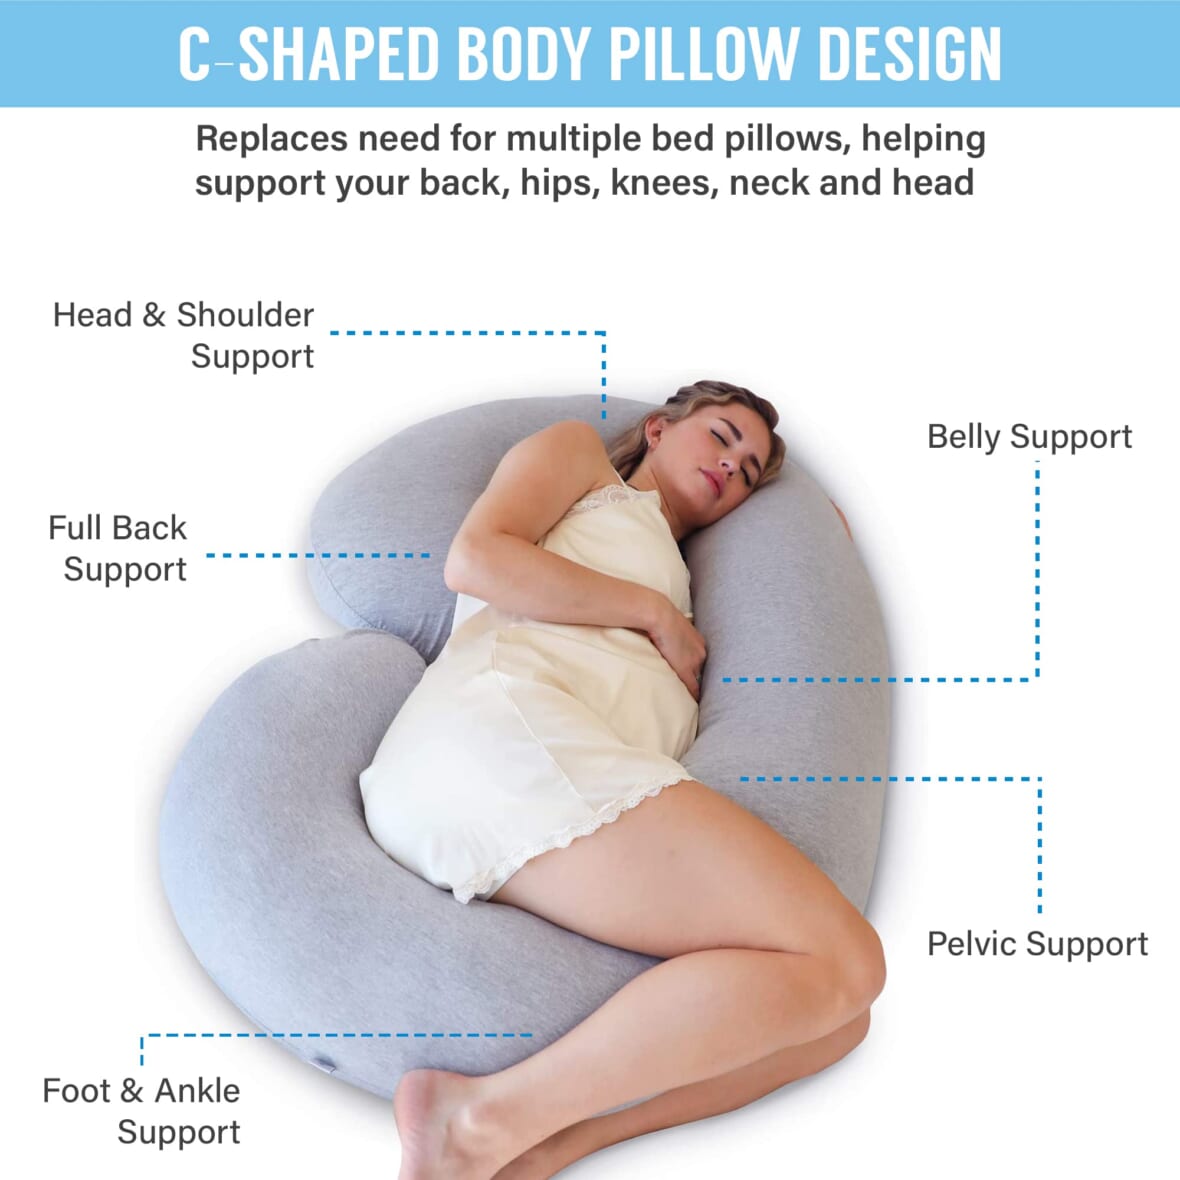 how to use a pregnancy pillow